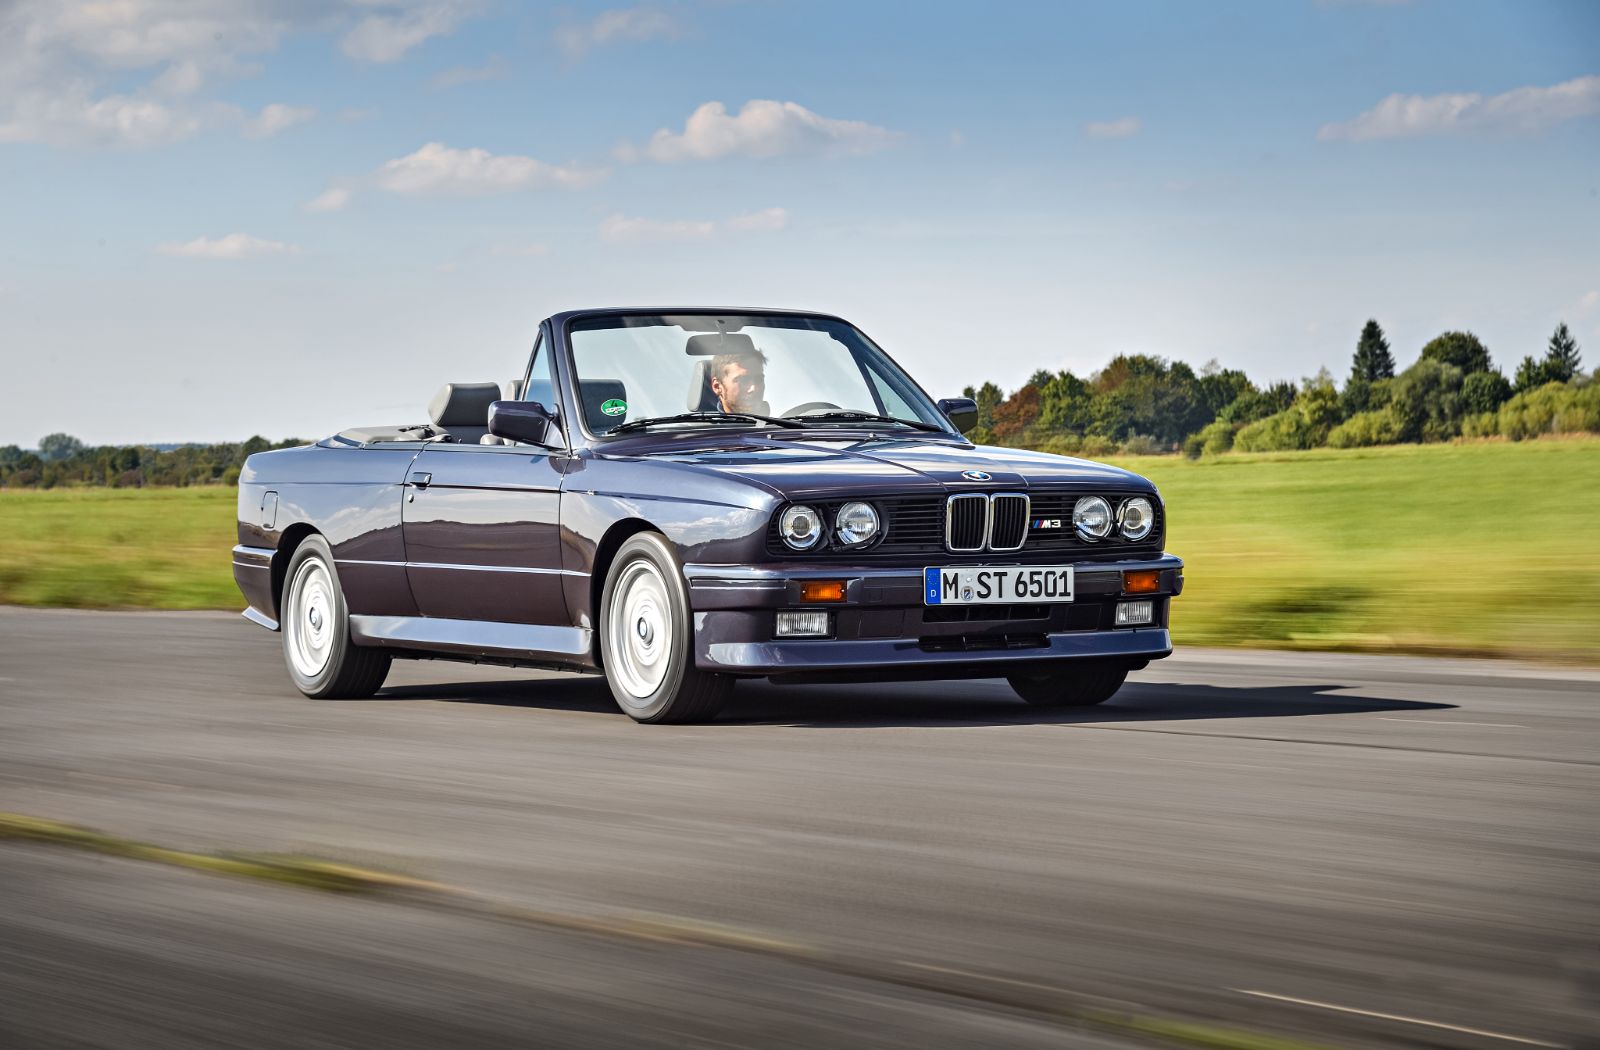 BMW Only Built 781 Examples Of The E30 M3 Convertible And This Is One Of  Them